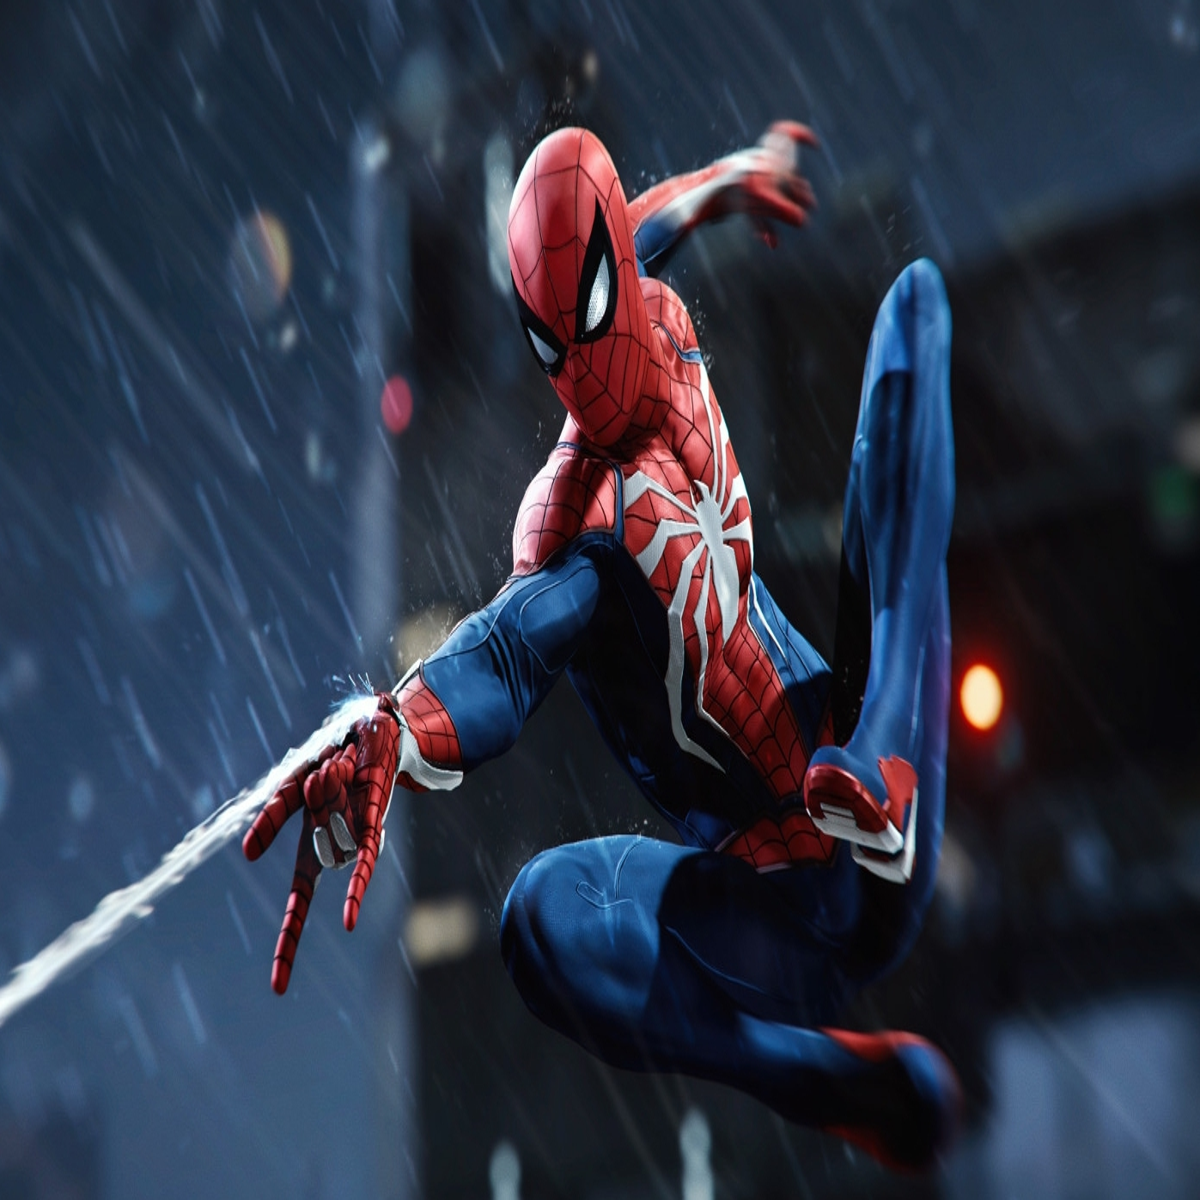 Marvel's Spider-Man 2 review: Quite simply the best superhero game yet